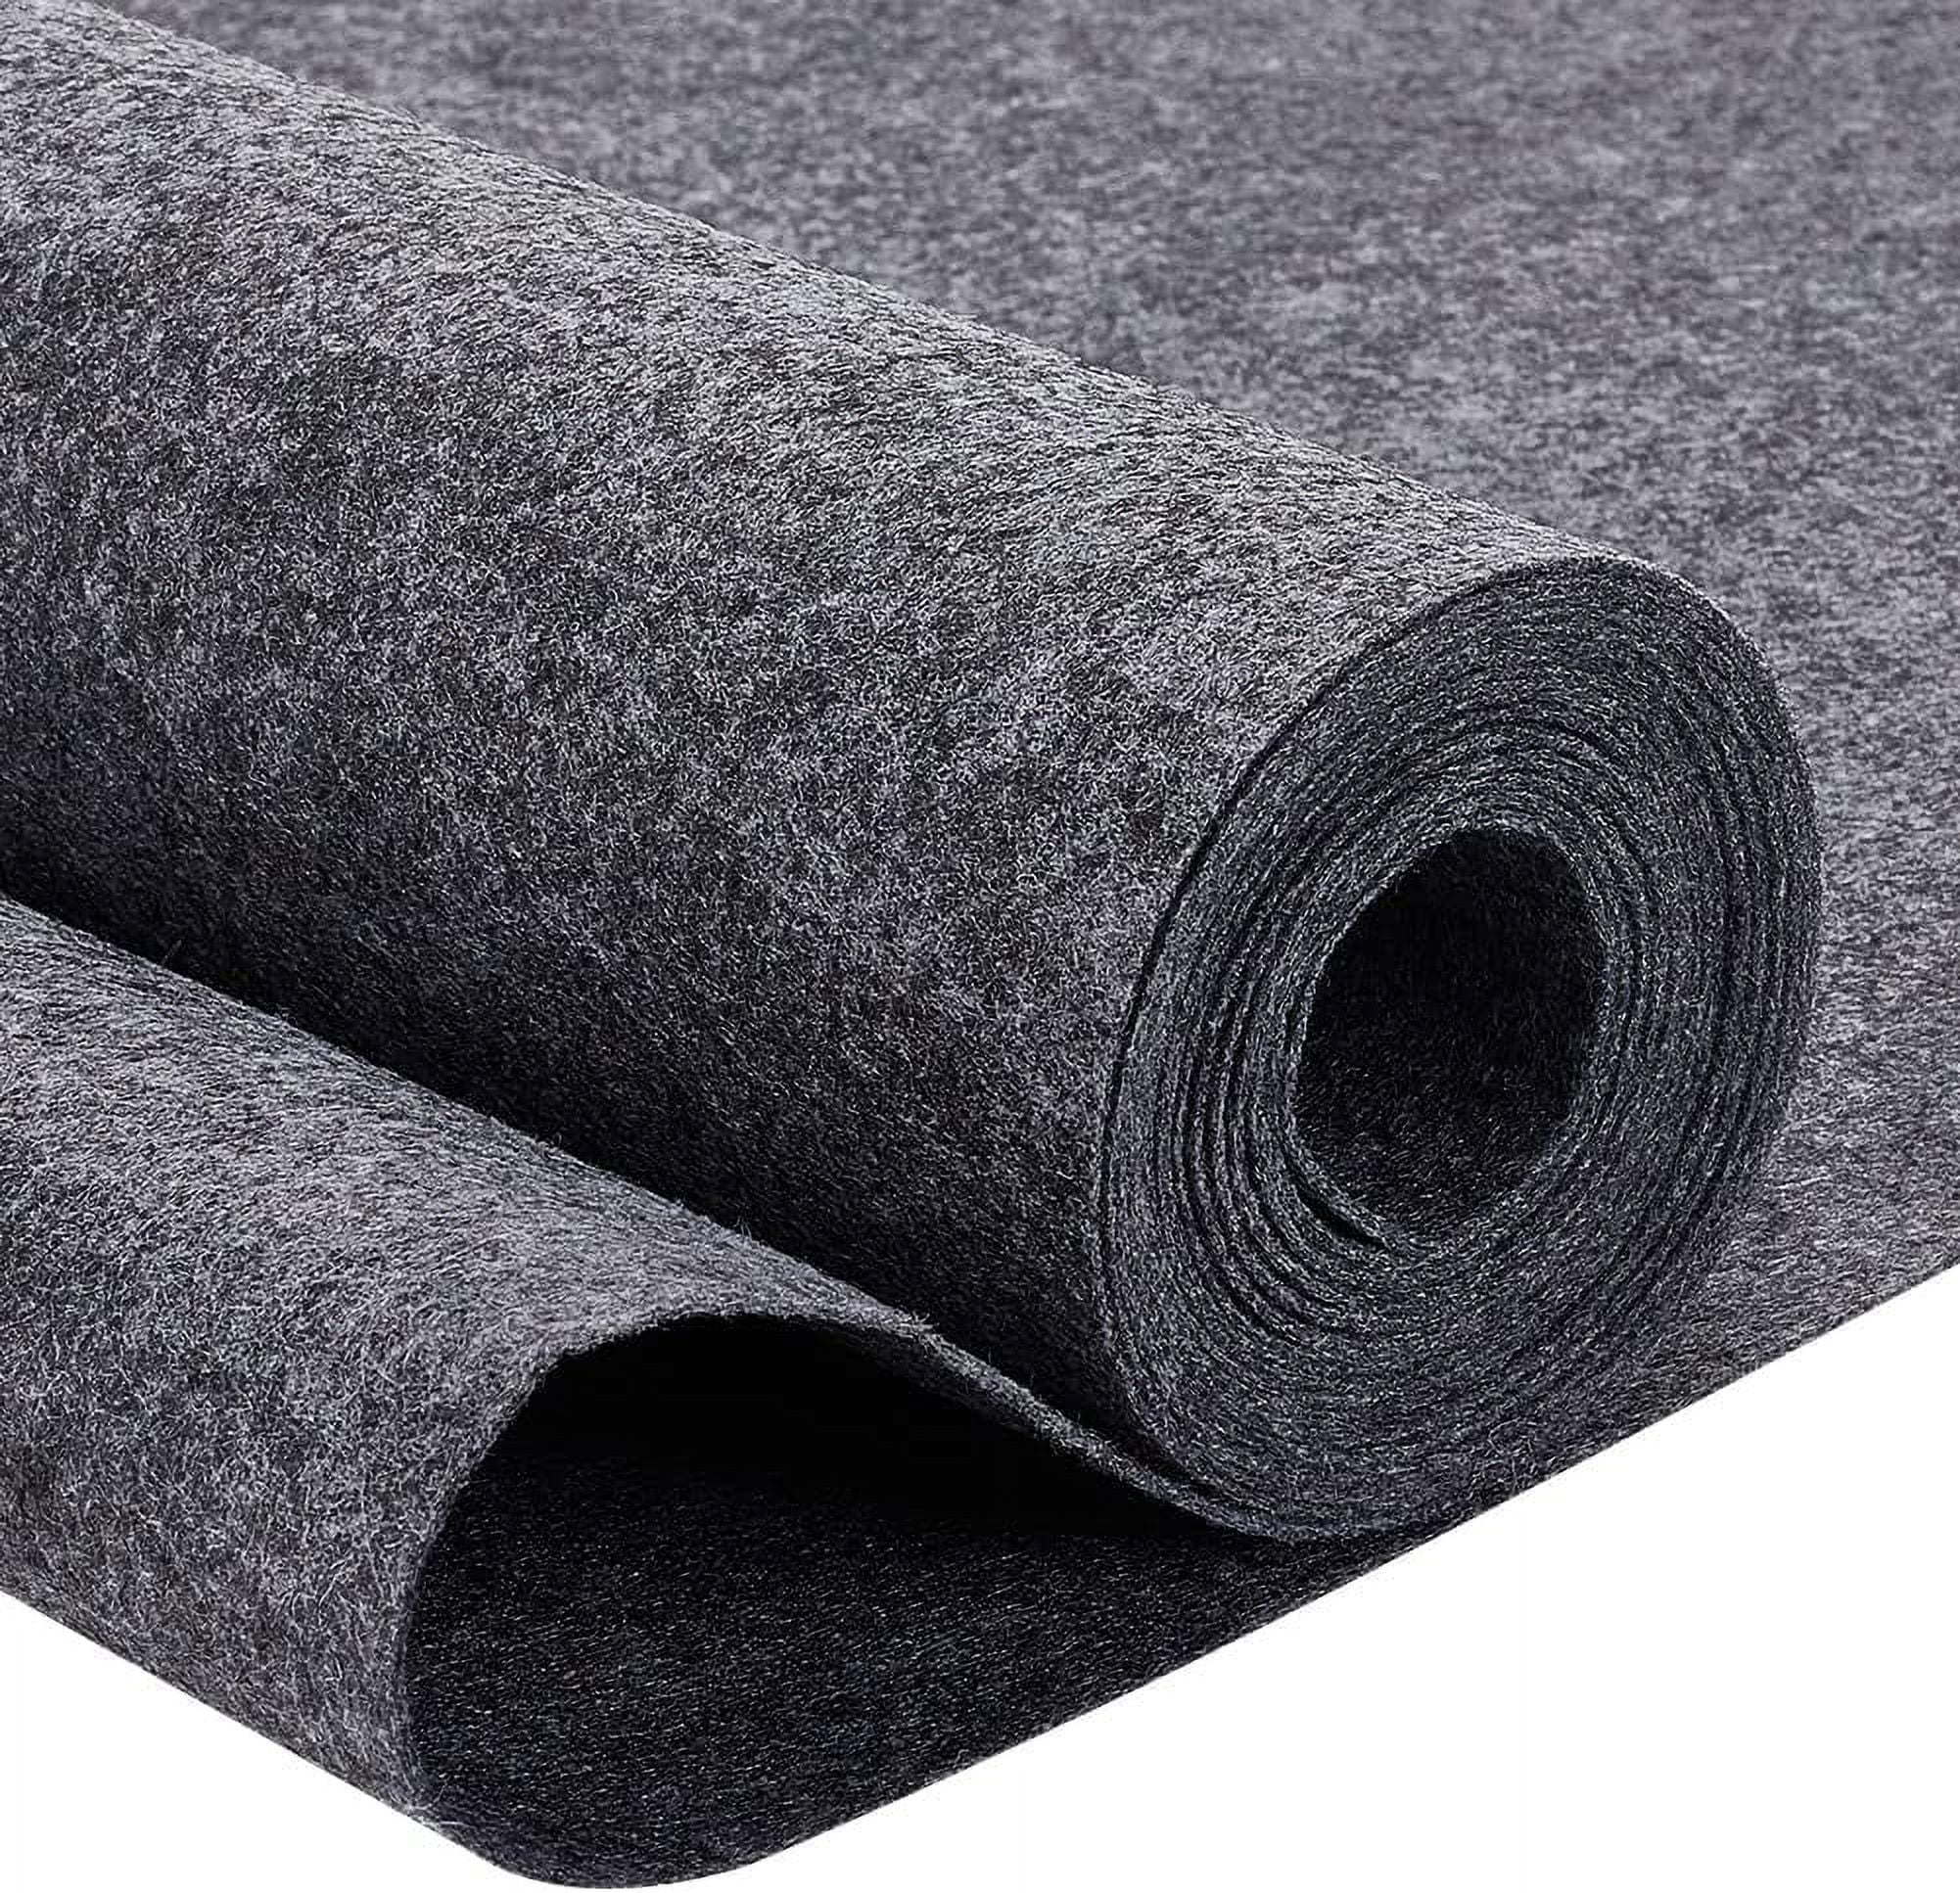 10FT 15.75 Inch Wide Black Felt Roll Craft Felt Nonwoven Fabric Sheets  Great Felt for Crafts Patchwork Sewing Costumes 